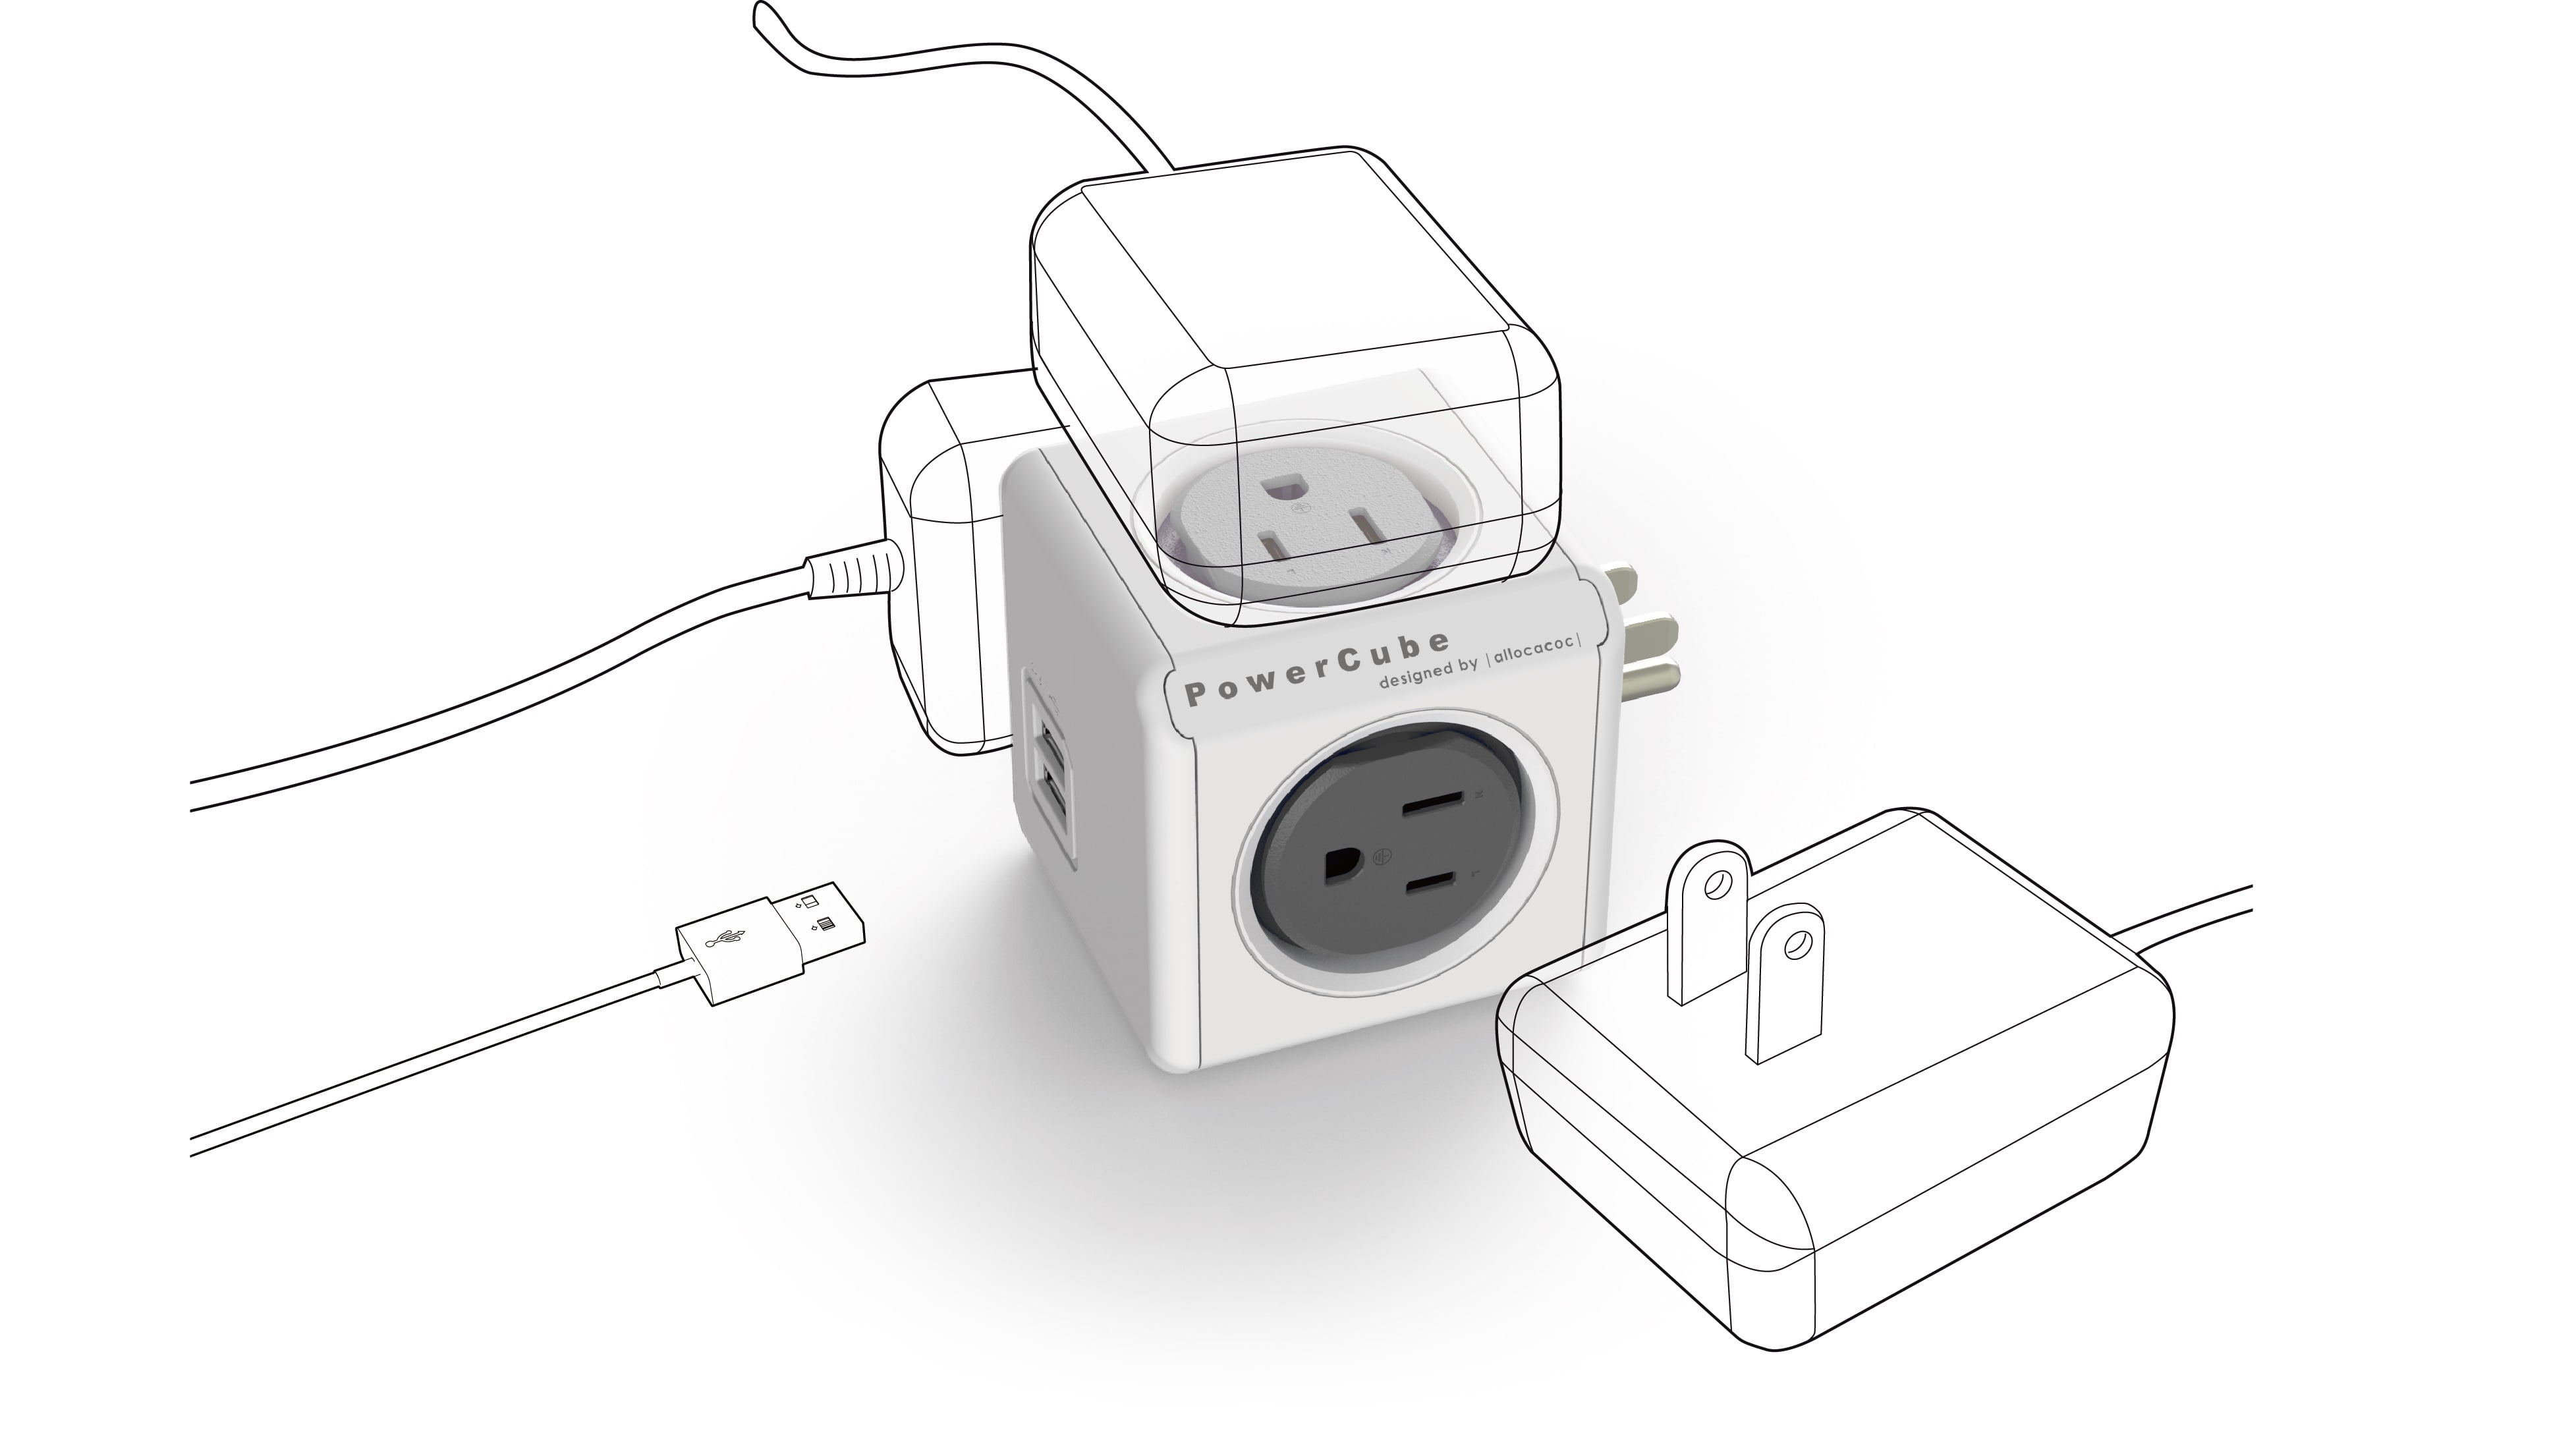 PowerCube-Cubic shaped 4 outlet plug with a switch-Original Remote –